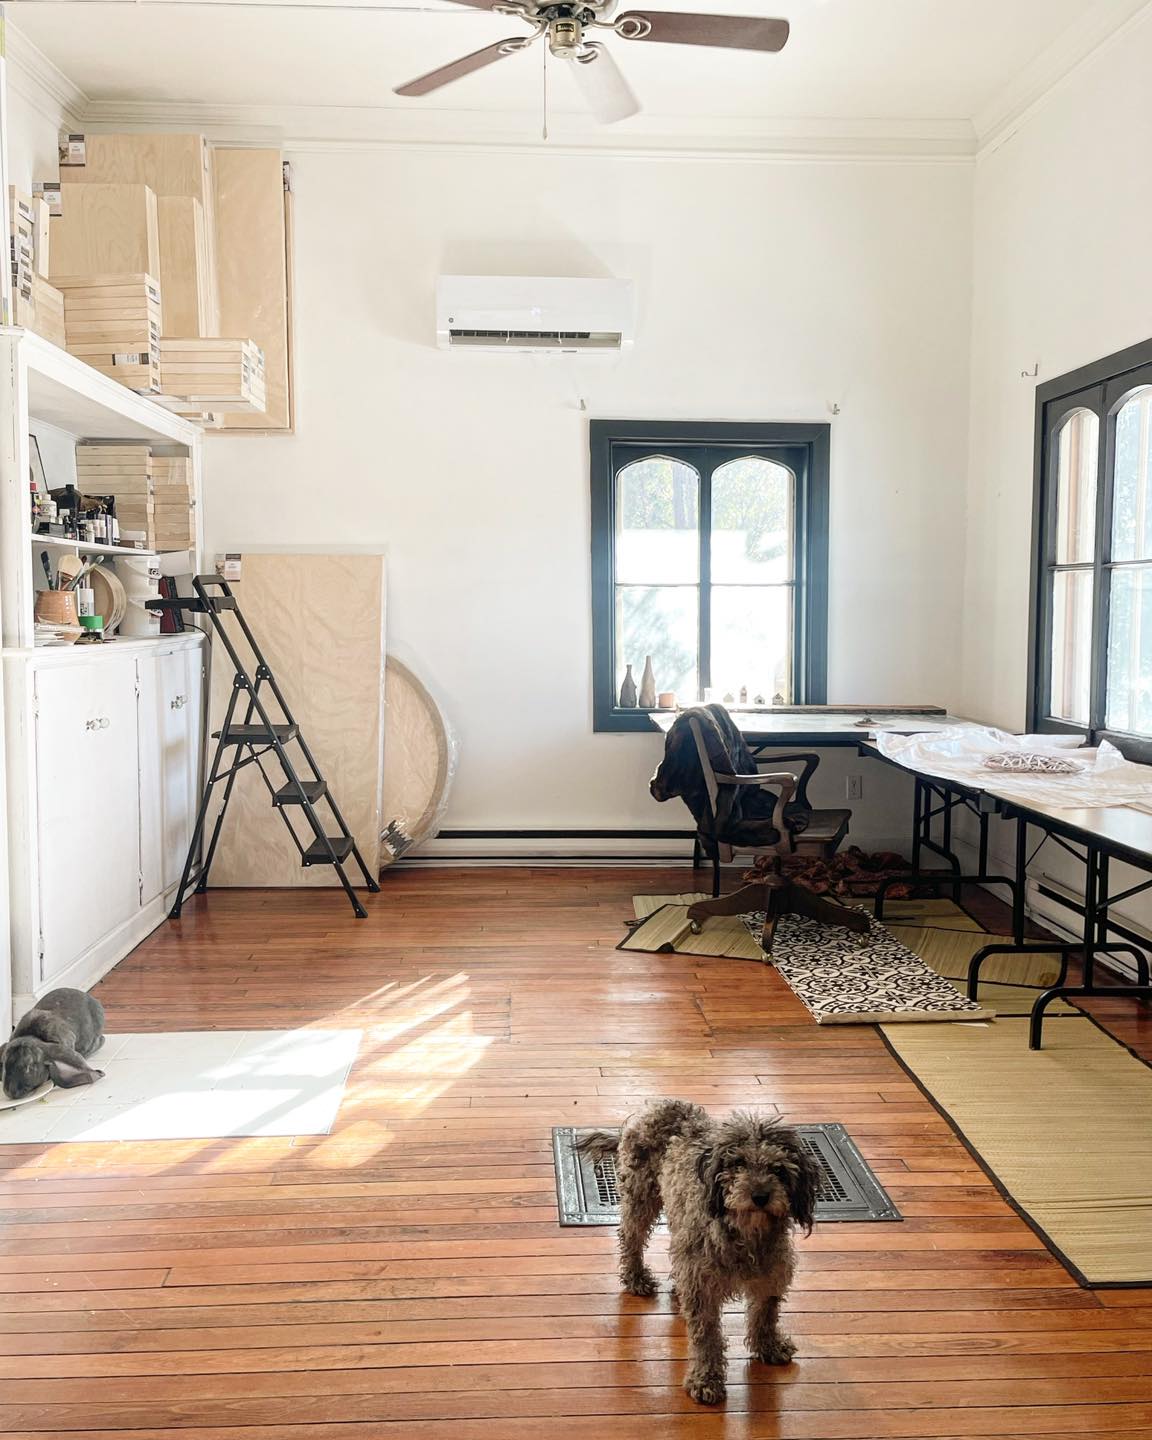 Light filtering in to the Rogue Goat studio as small dog stands on wooden floor